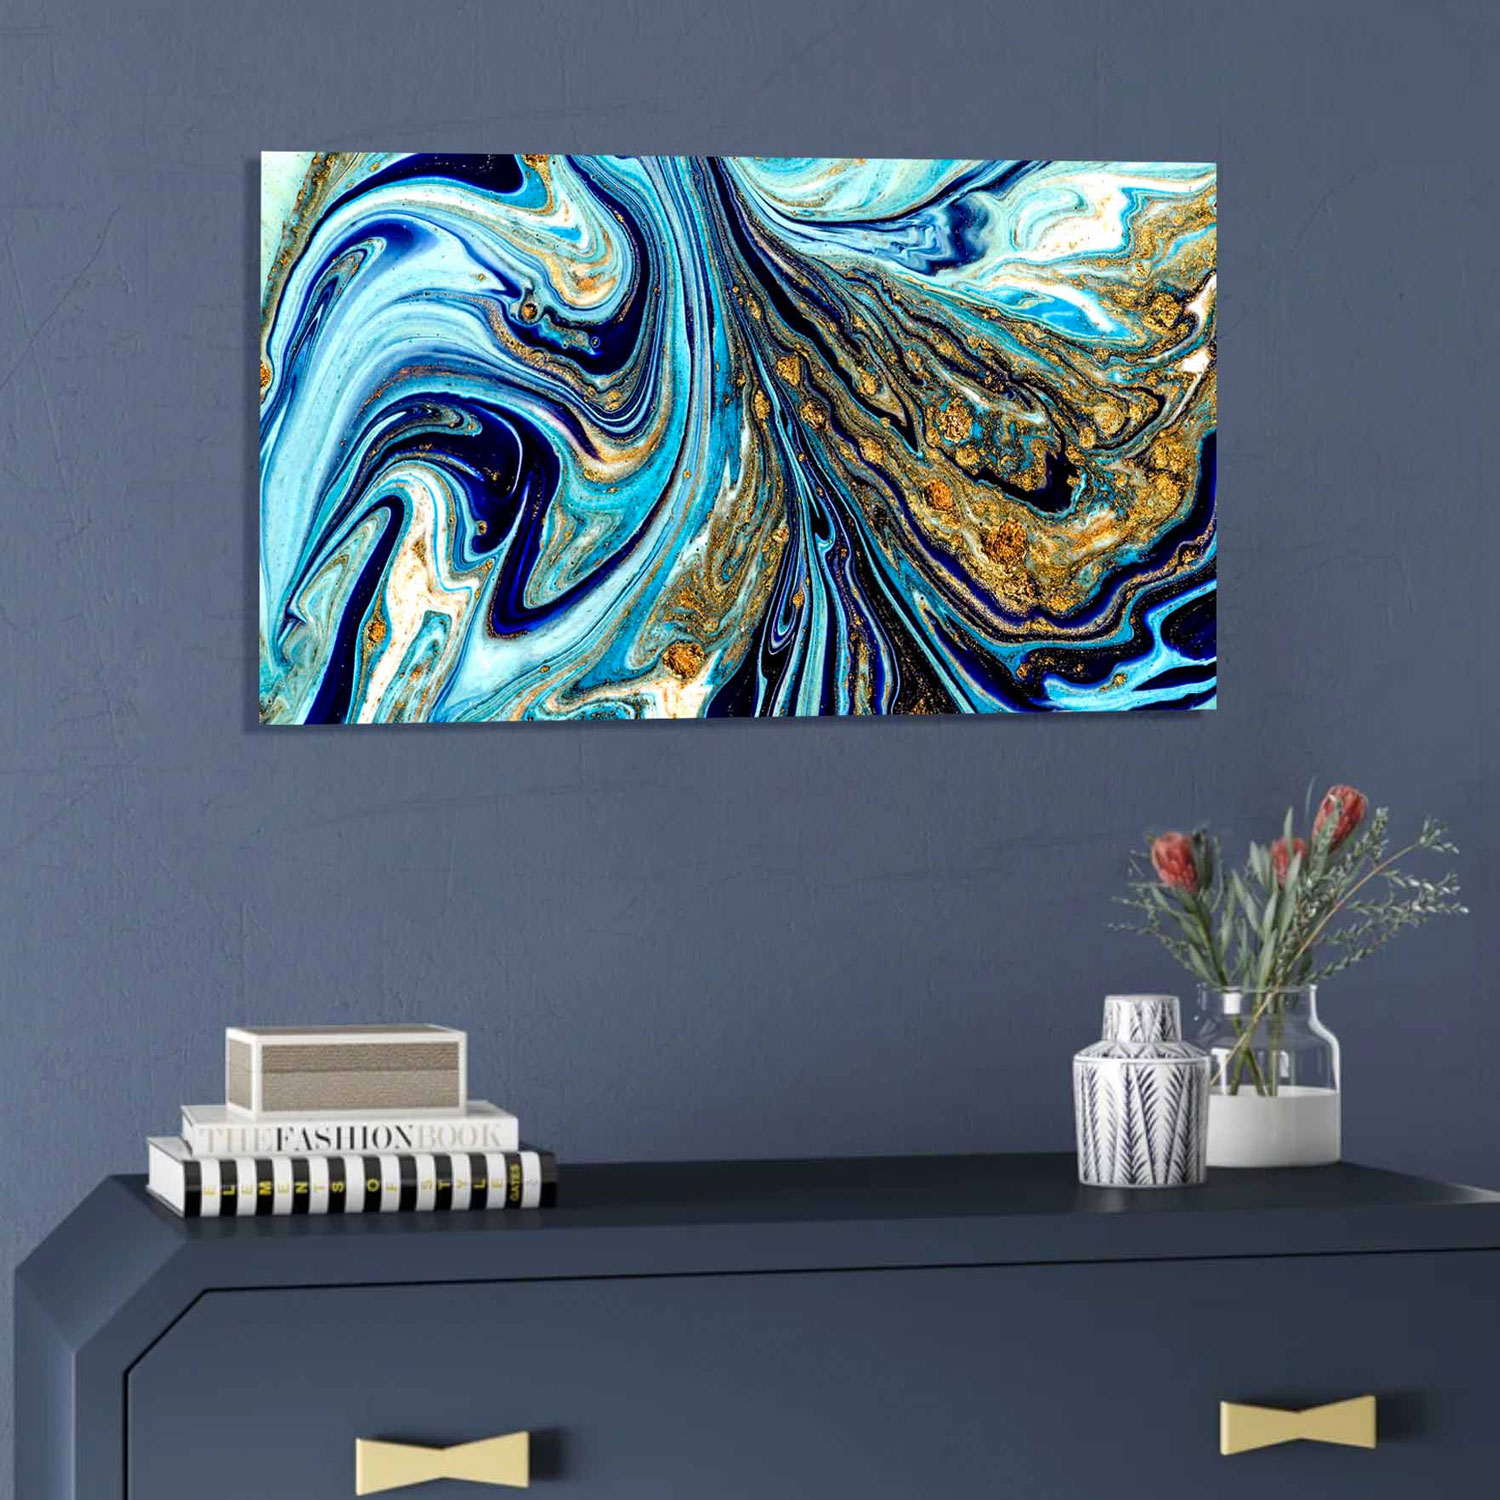 BLUE AND GOLD ABSTRACT TGA